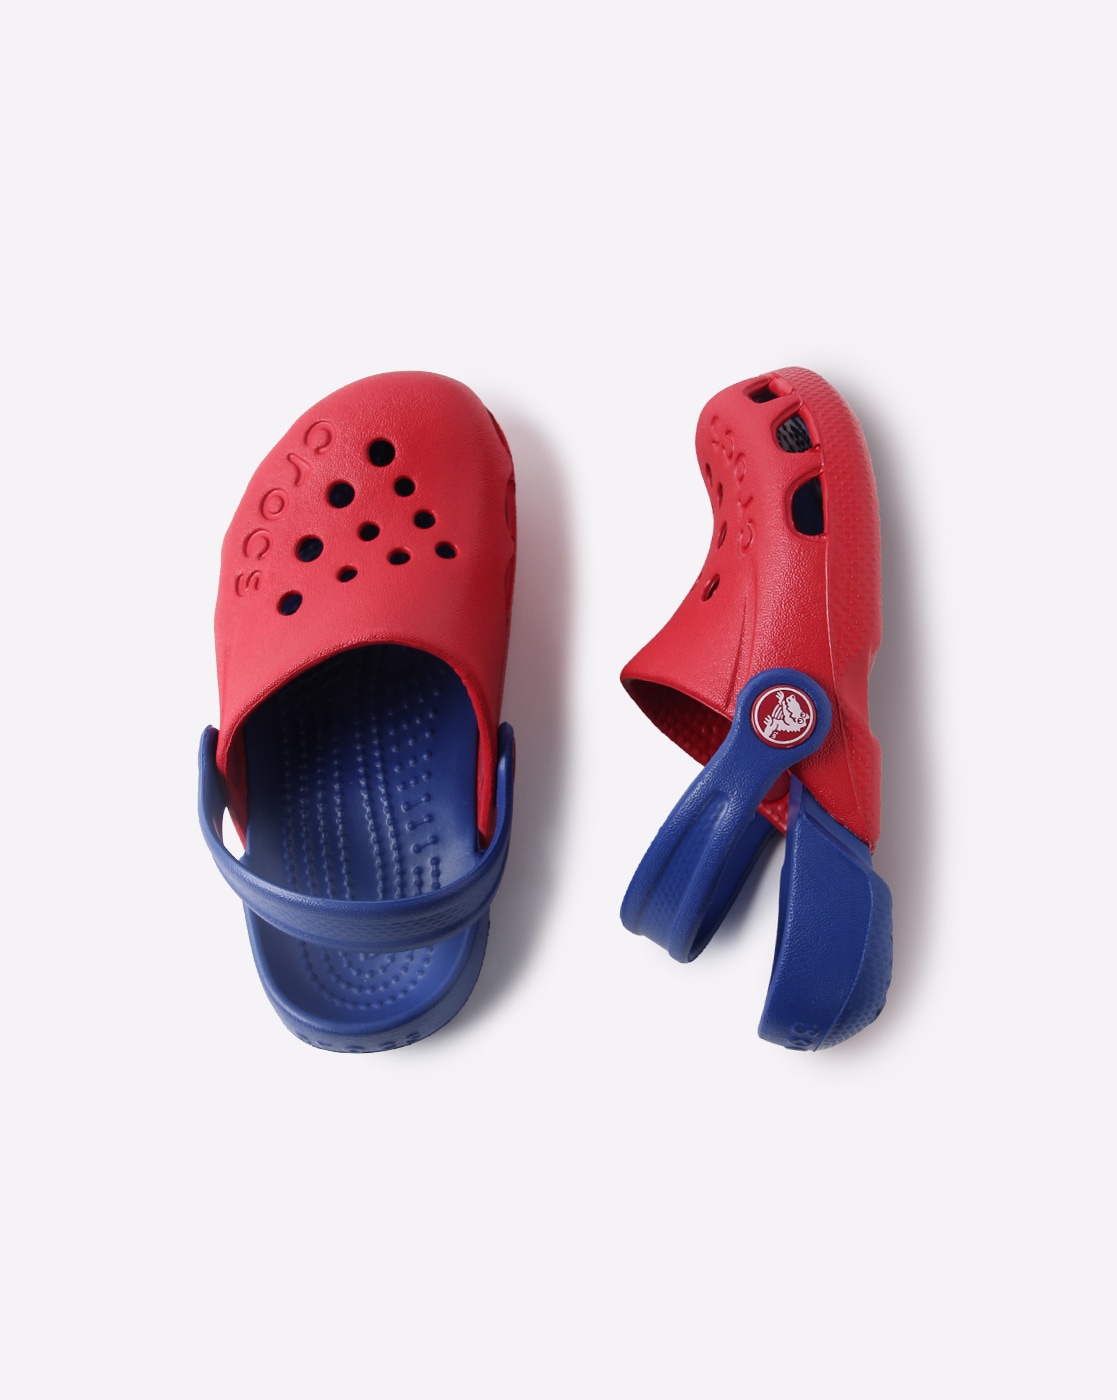 Red \u0026 Blue Sandals for Boys by CROCS 